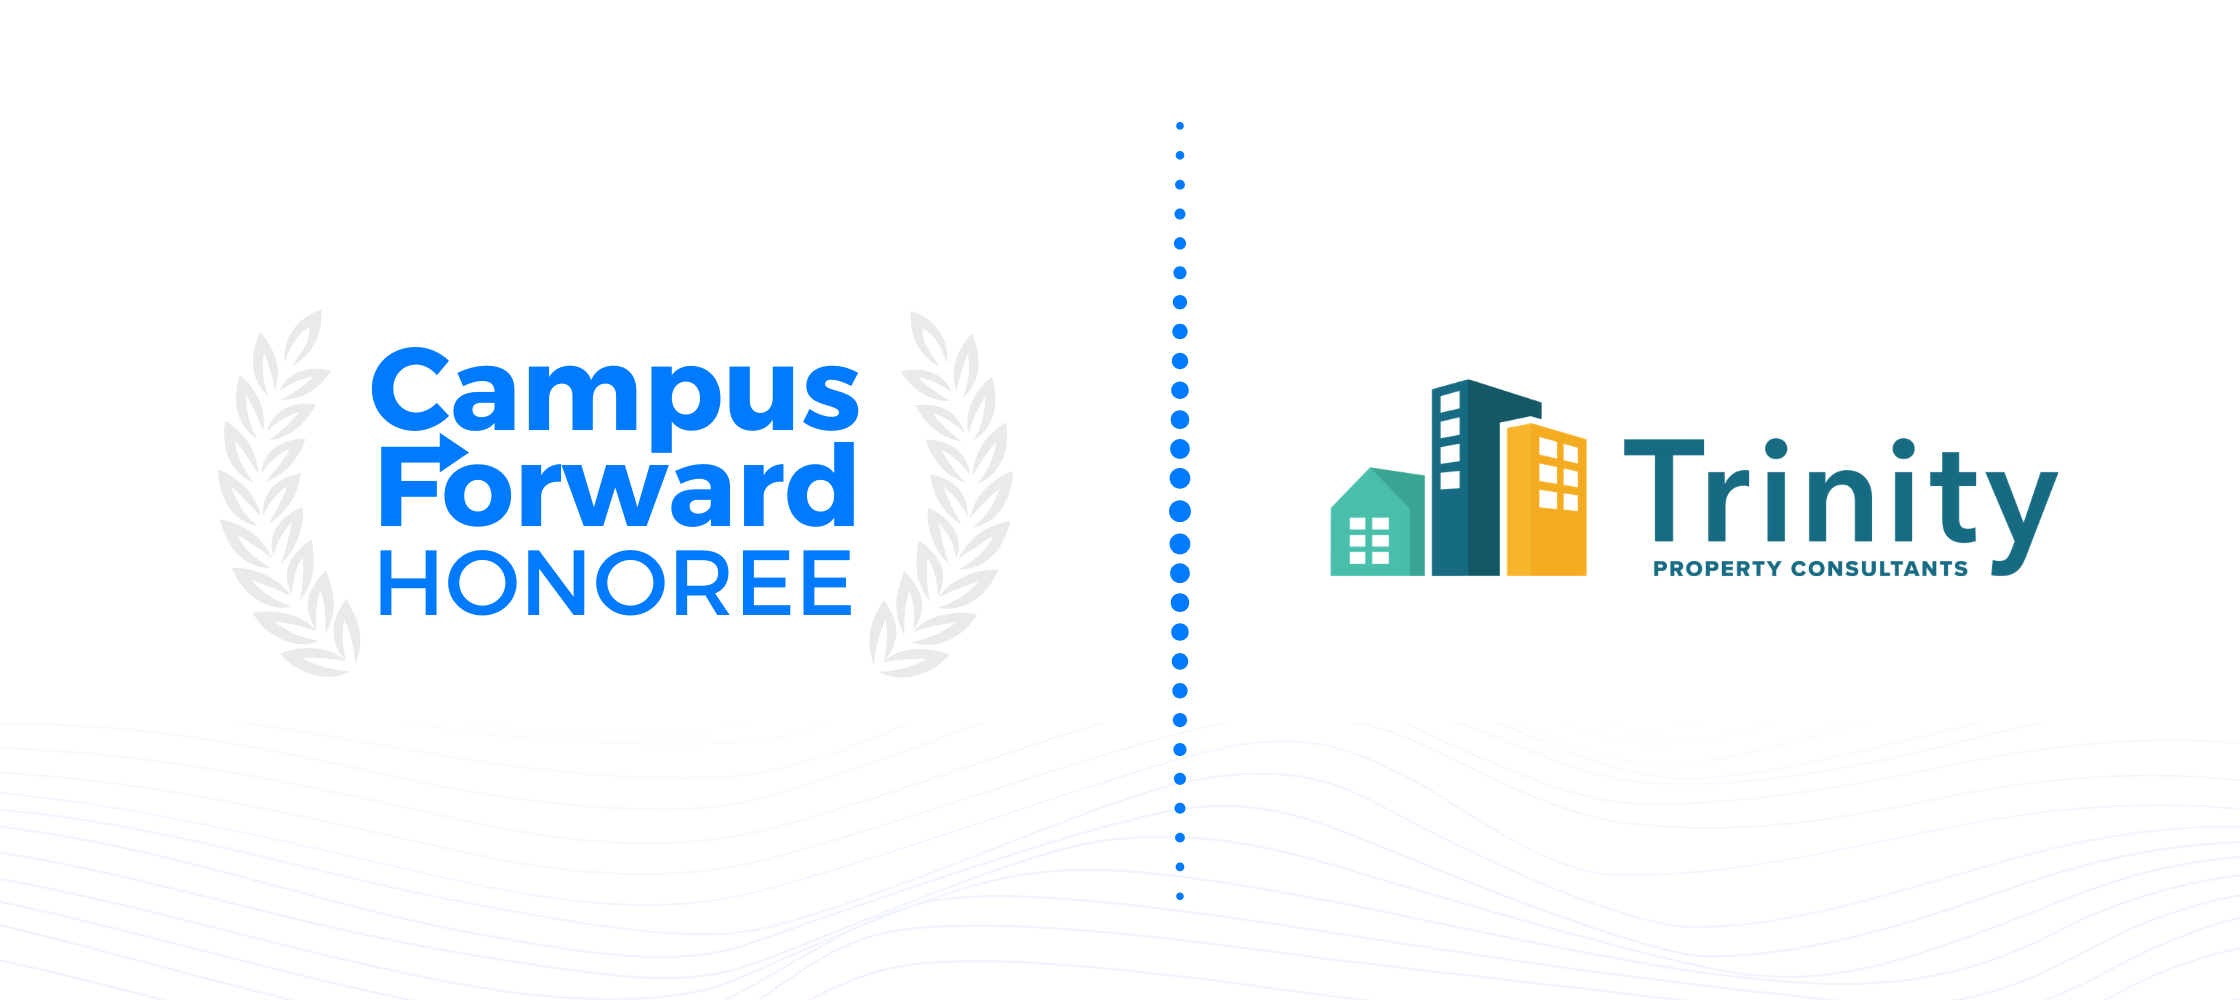 Campus Forward Honoree - Trinity Property Consultants